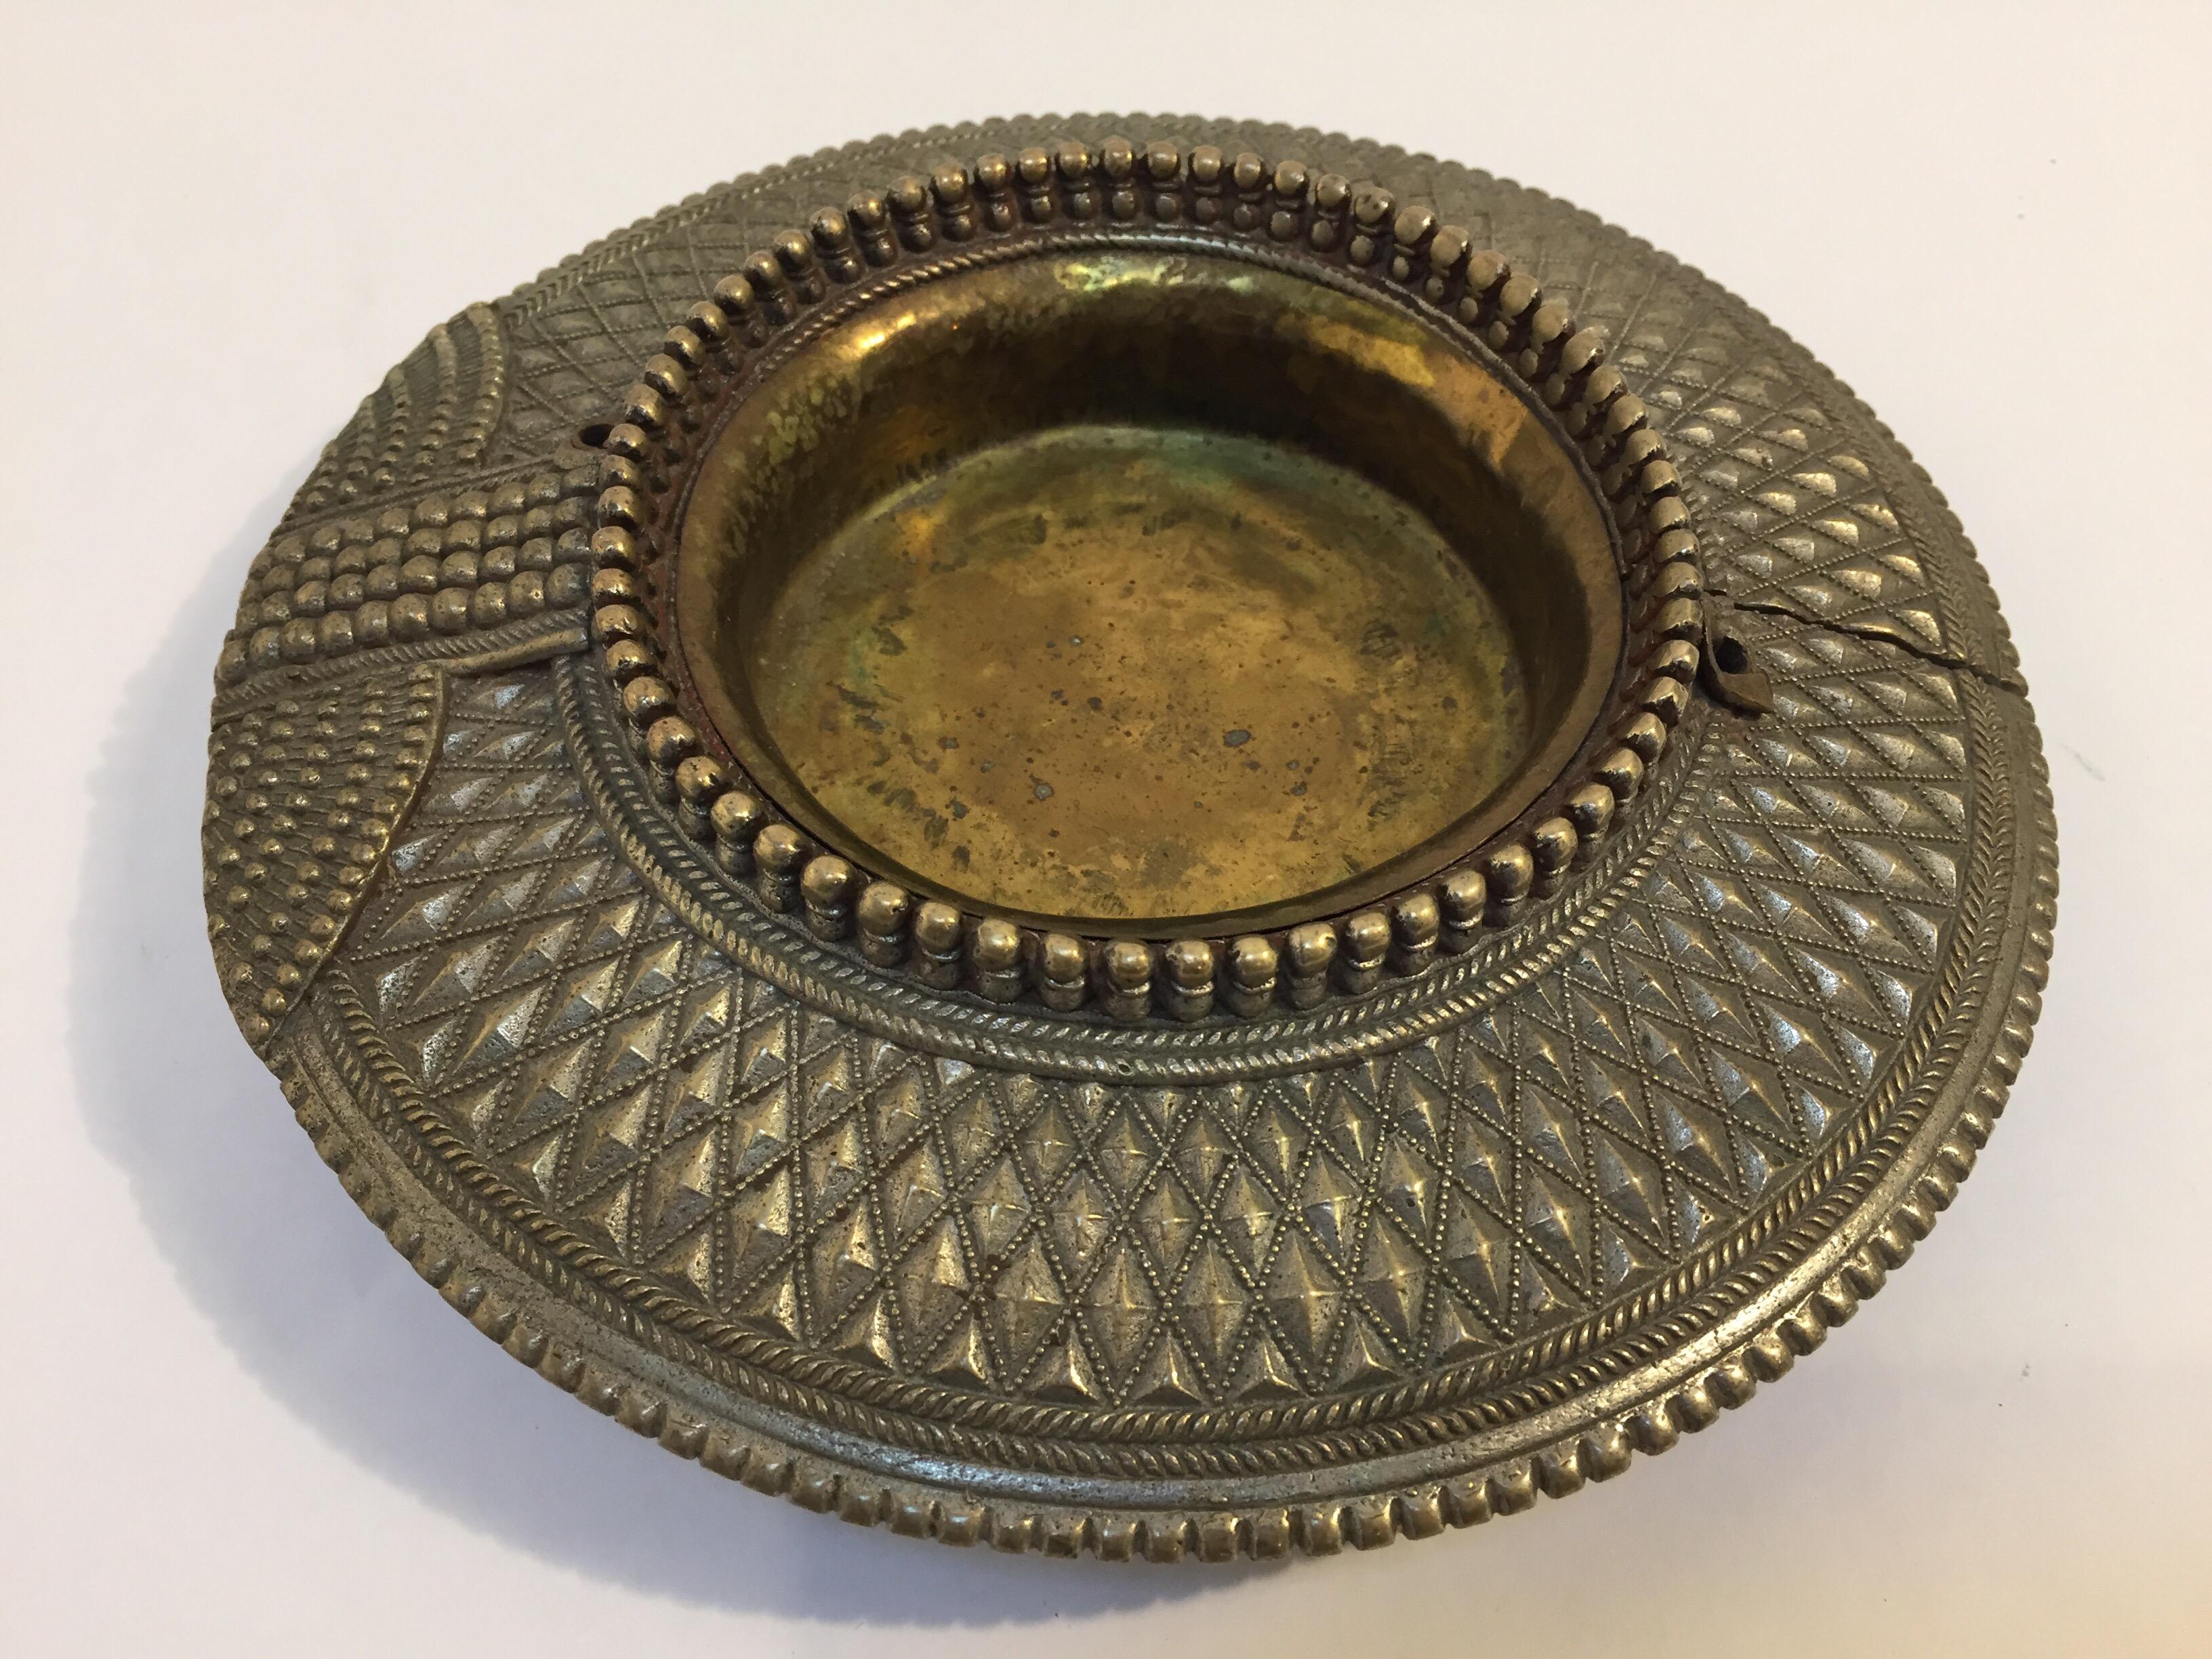 Dhokra art old ethnic tribal brass traditional ankle bracelet from India, repurposed as ashtrays ,catchall, or vide poche. 
Handcrafted of a hollow band of heavy brass decorated with chevron repoussé banding and lost wax granulation.
The brass inner